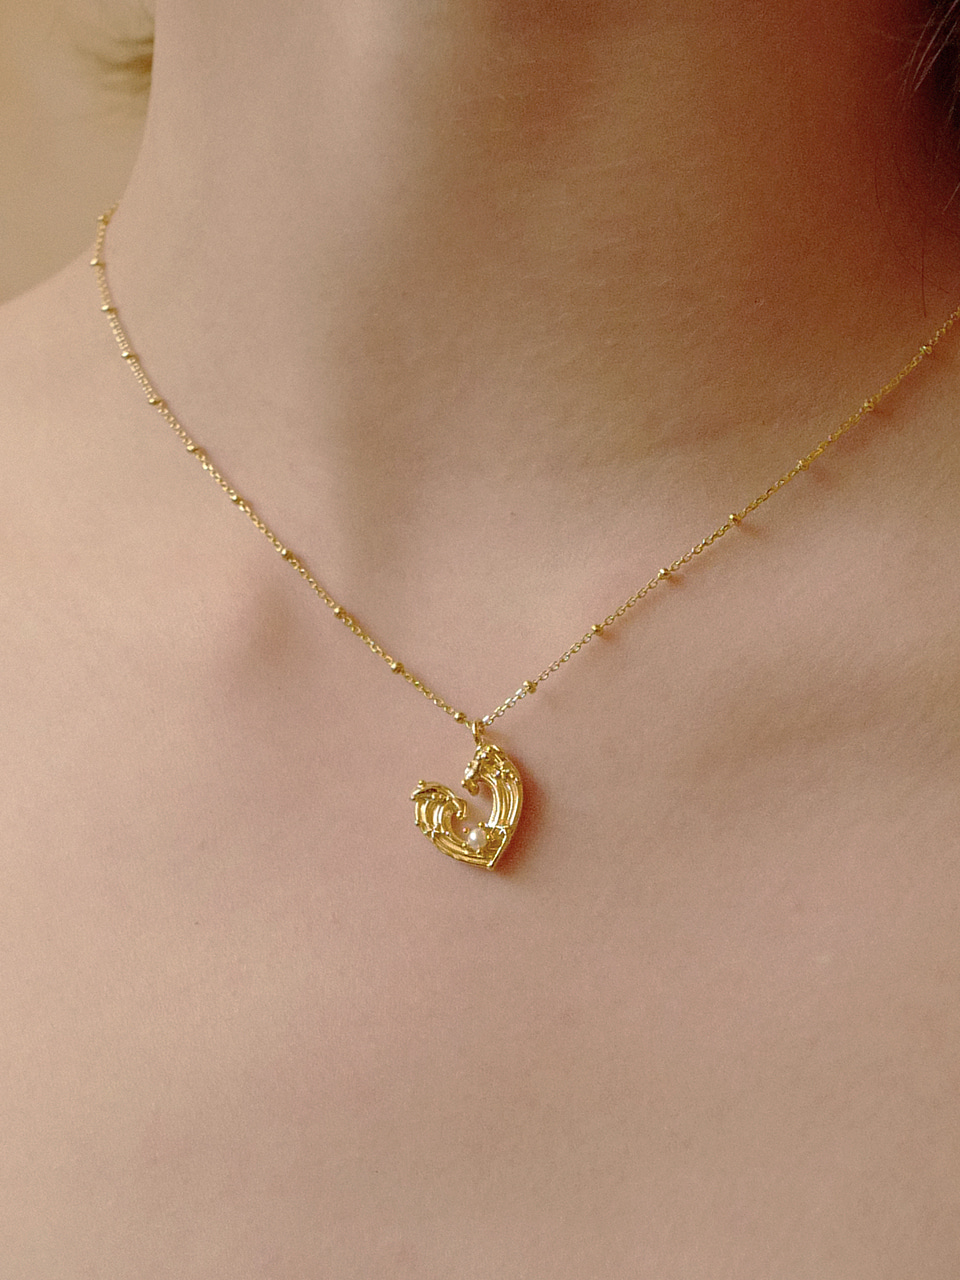 Wave Heart Necklace